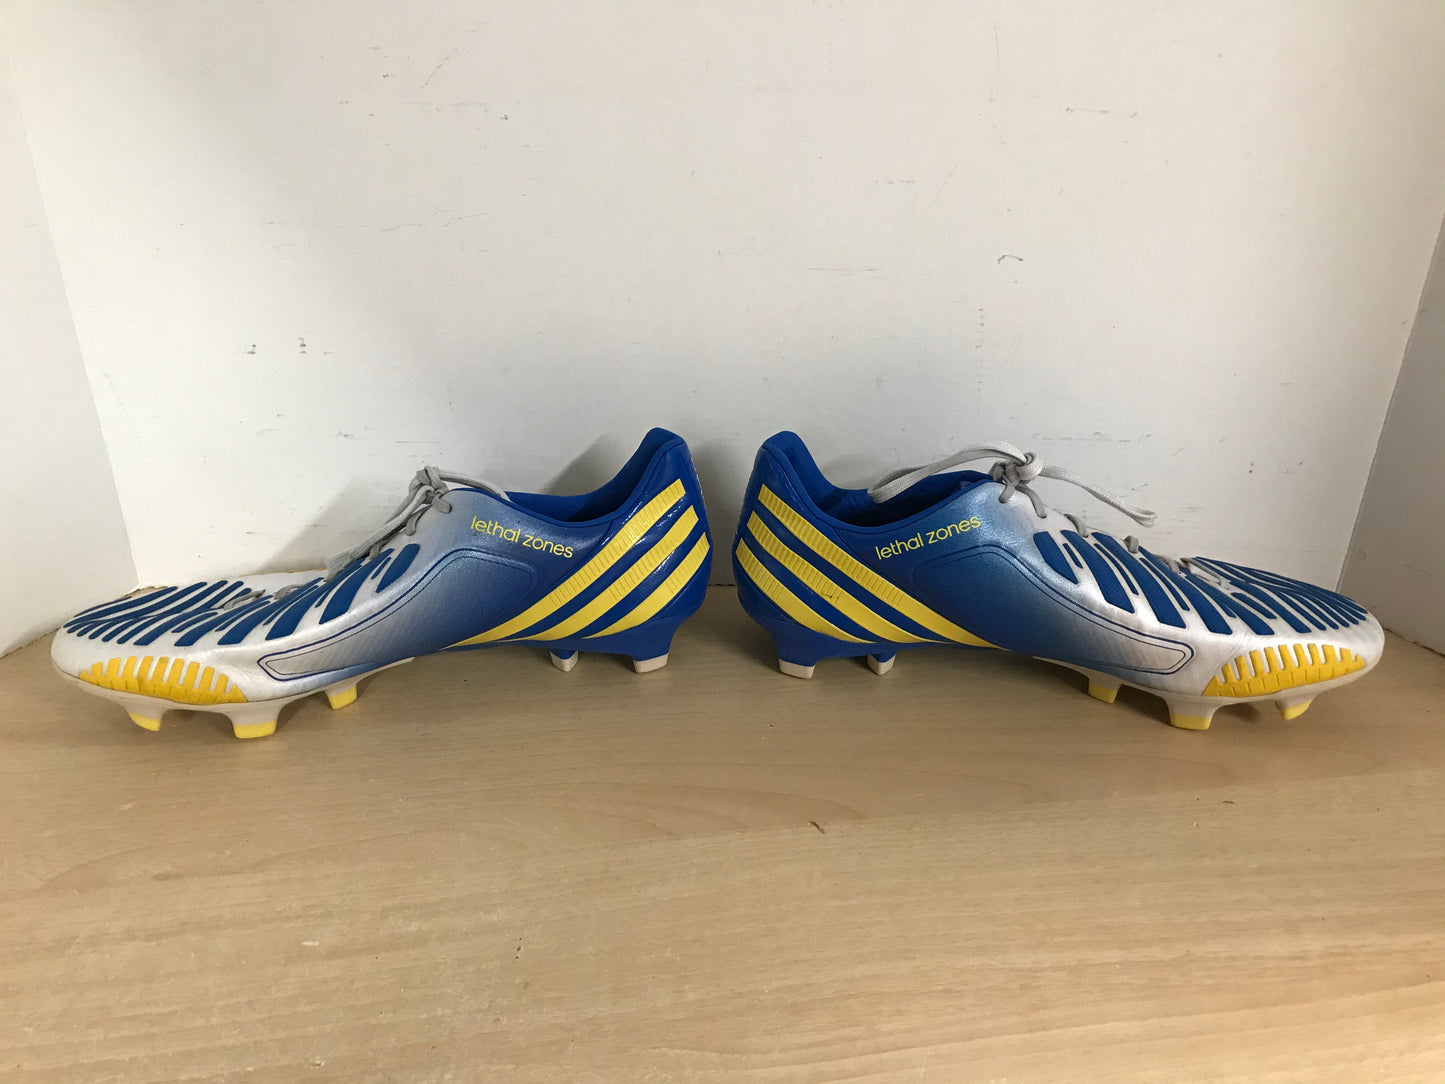 Soccer Shoes Cleats Men's Size 9 Adidas Preditor Blue White Yellow